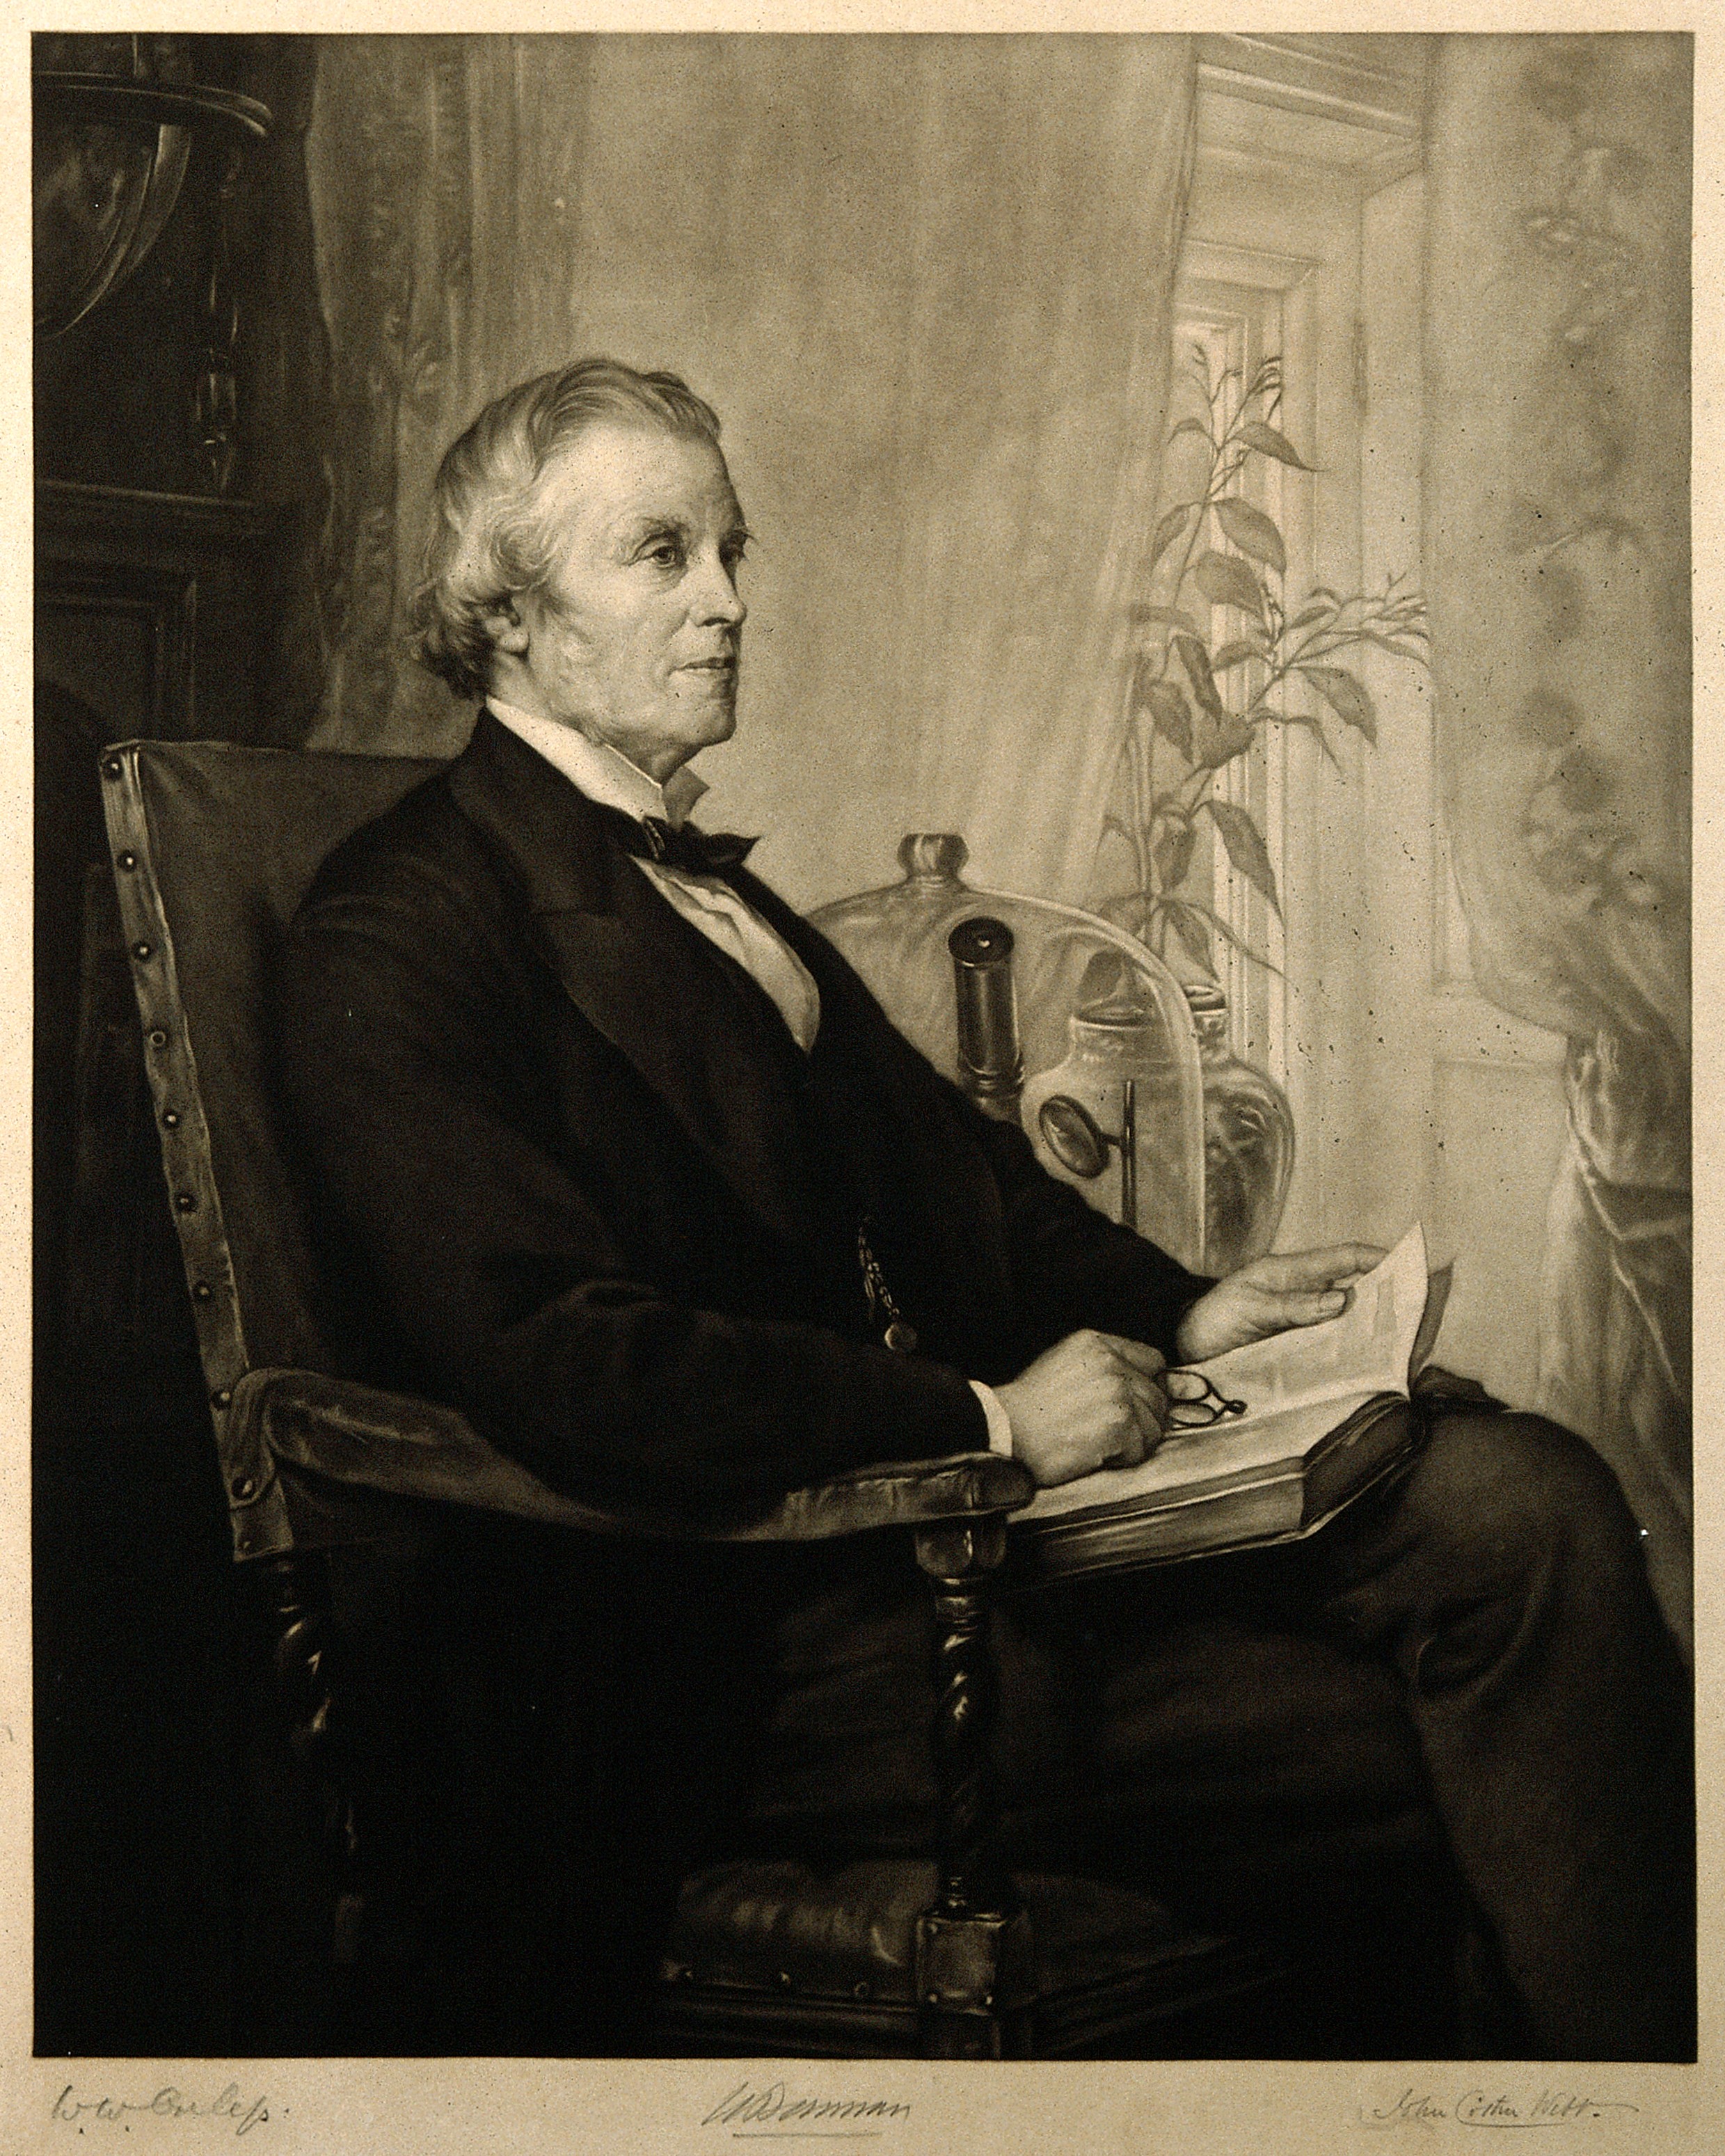 Sir William Bowman. Mezzotint by J. C. Webb after W. W. Oule Wellcome V0006456